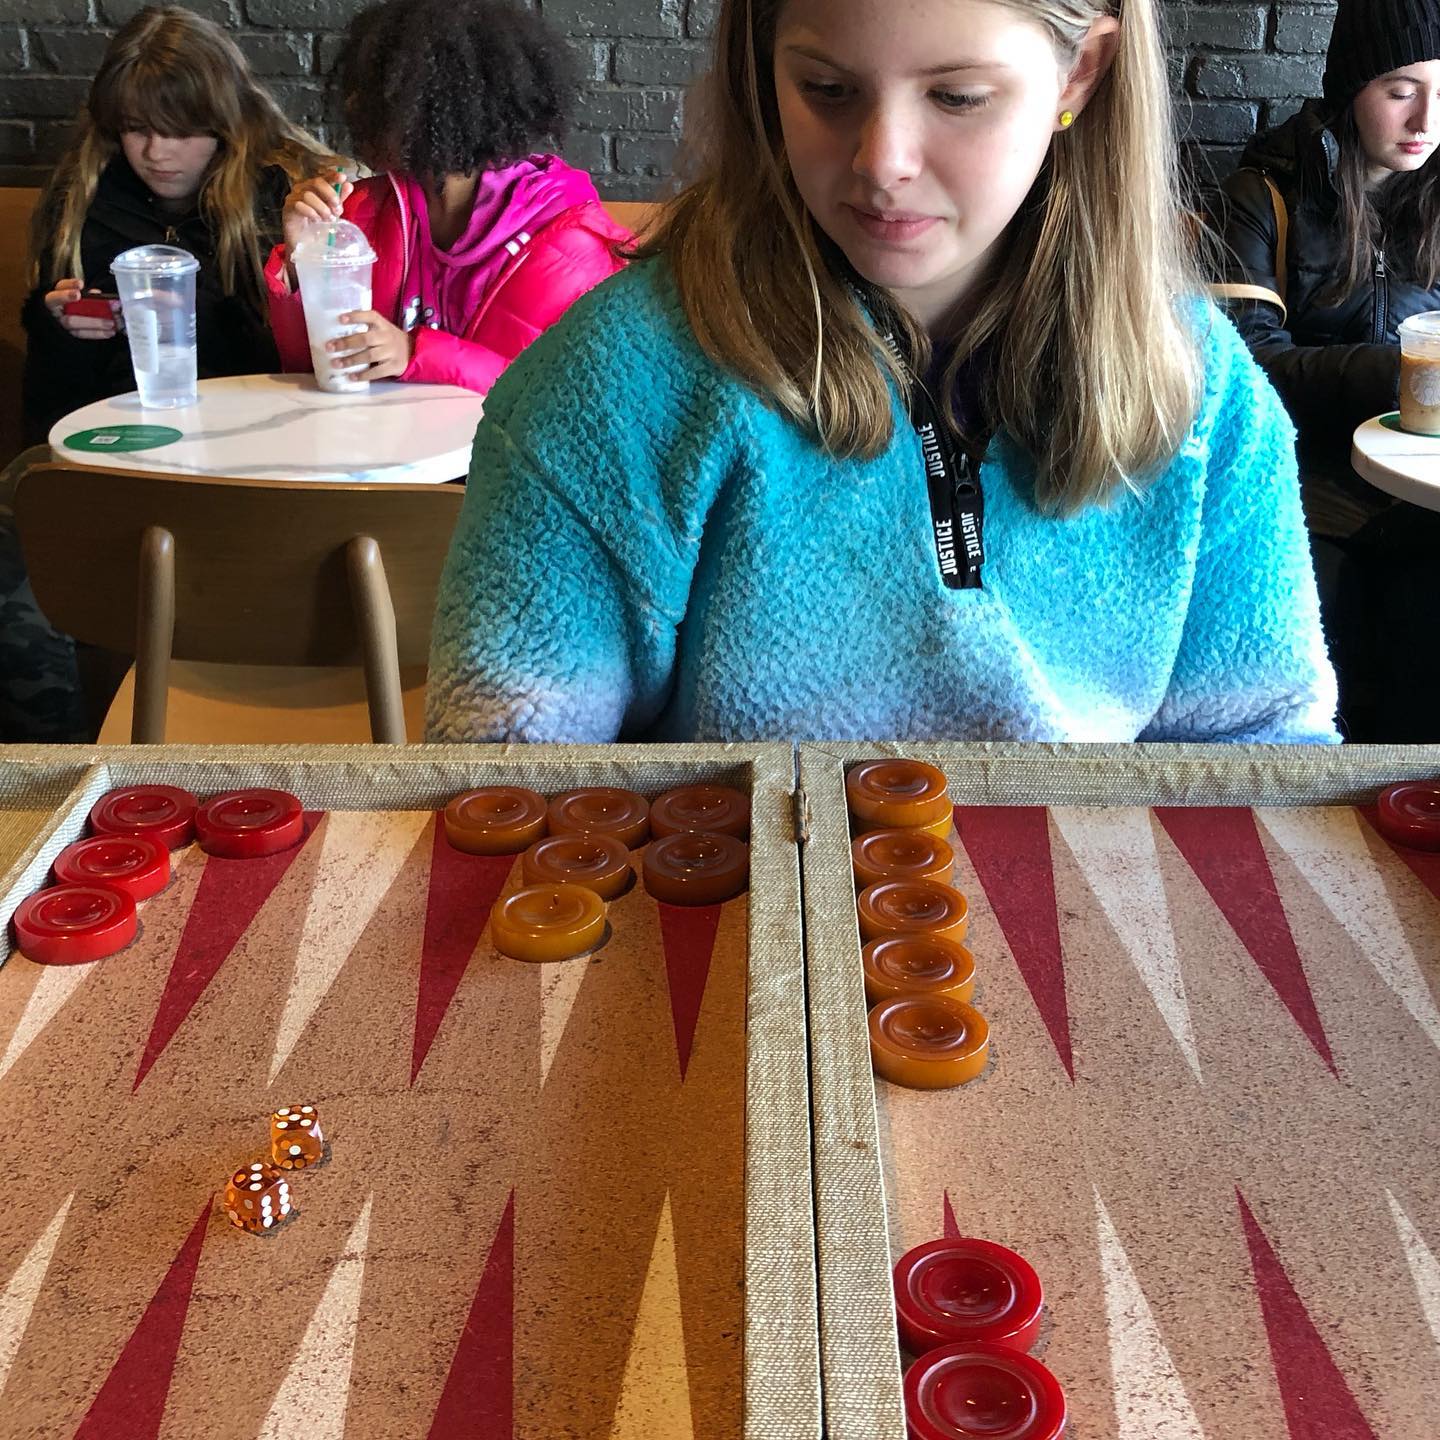 Backgammon. Coffee. My daughter. 2 perfect hours.